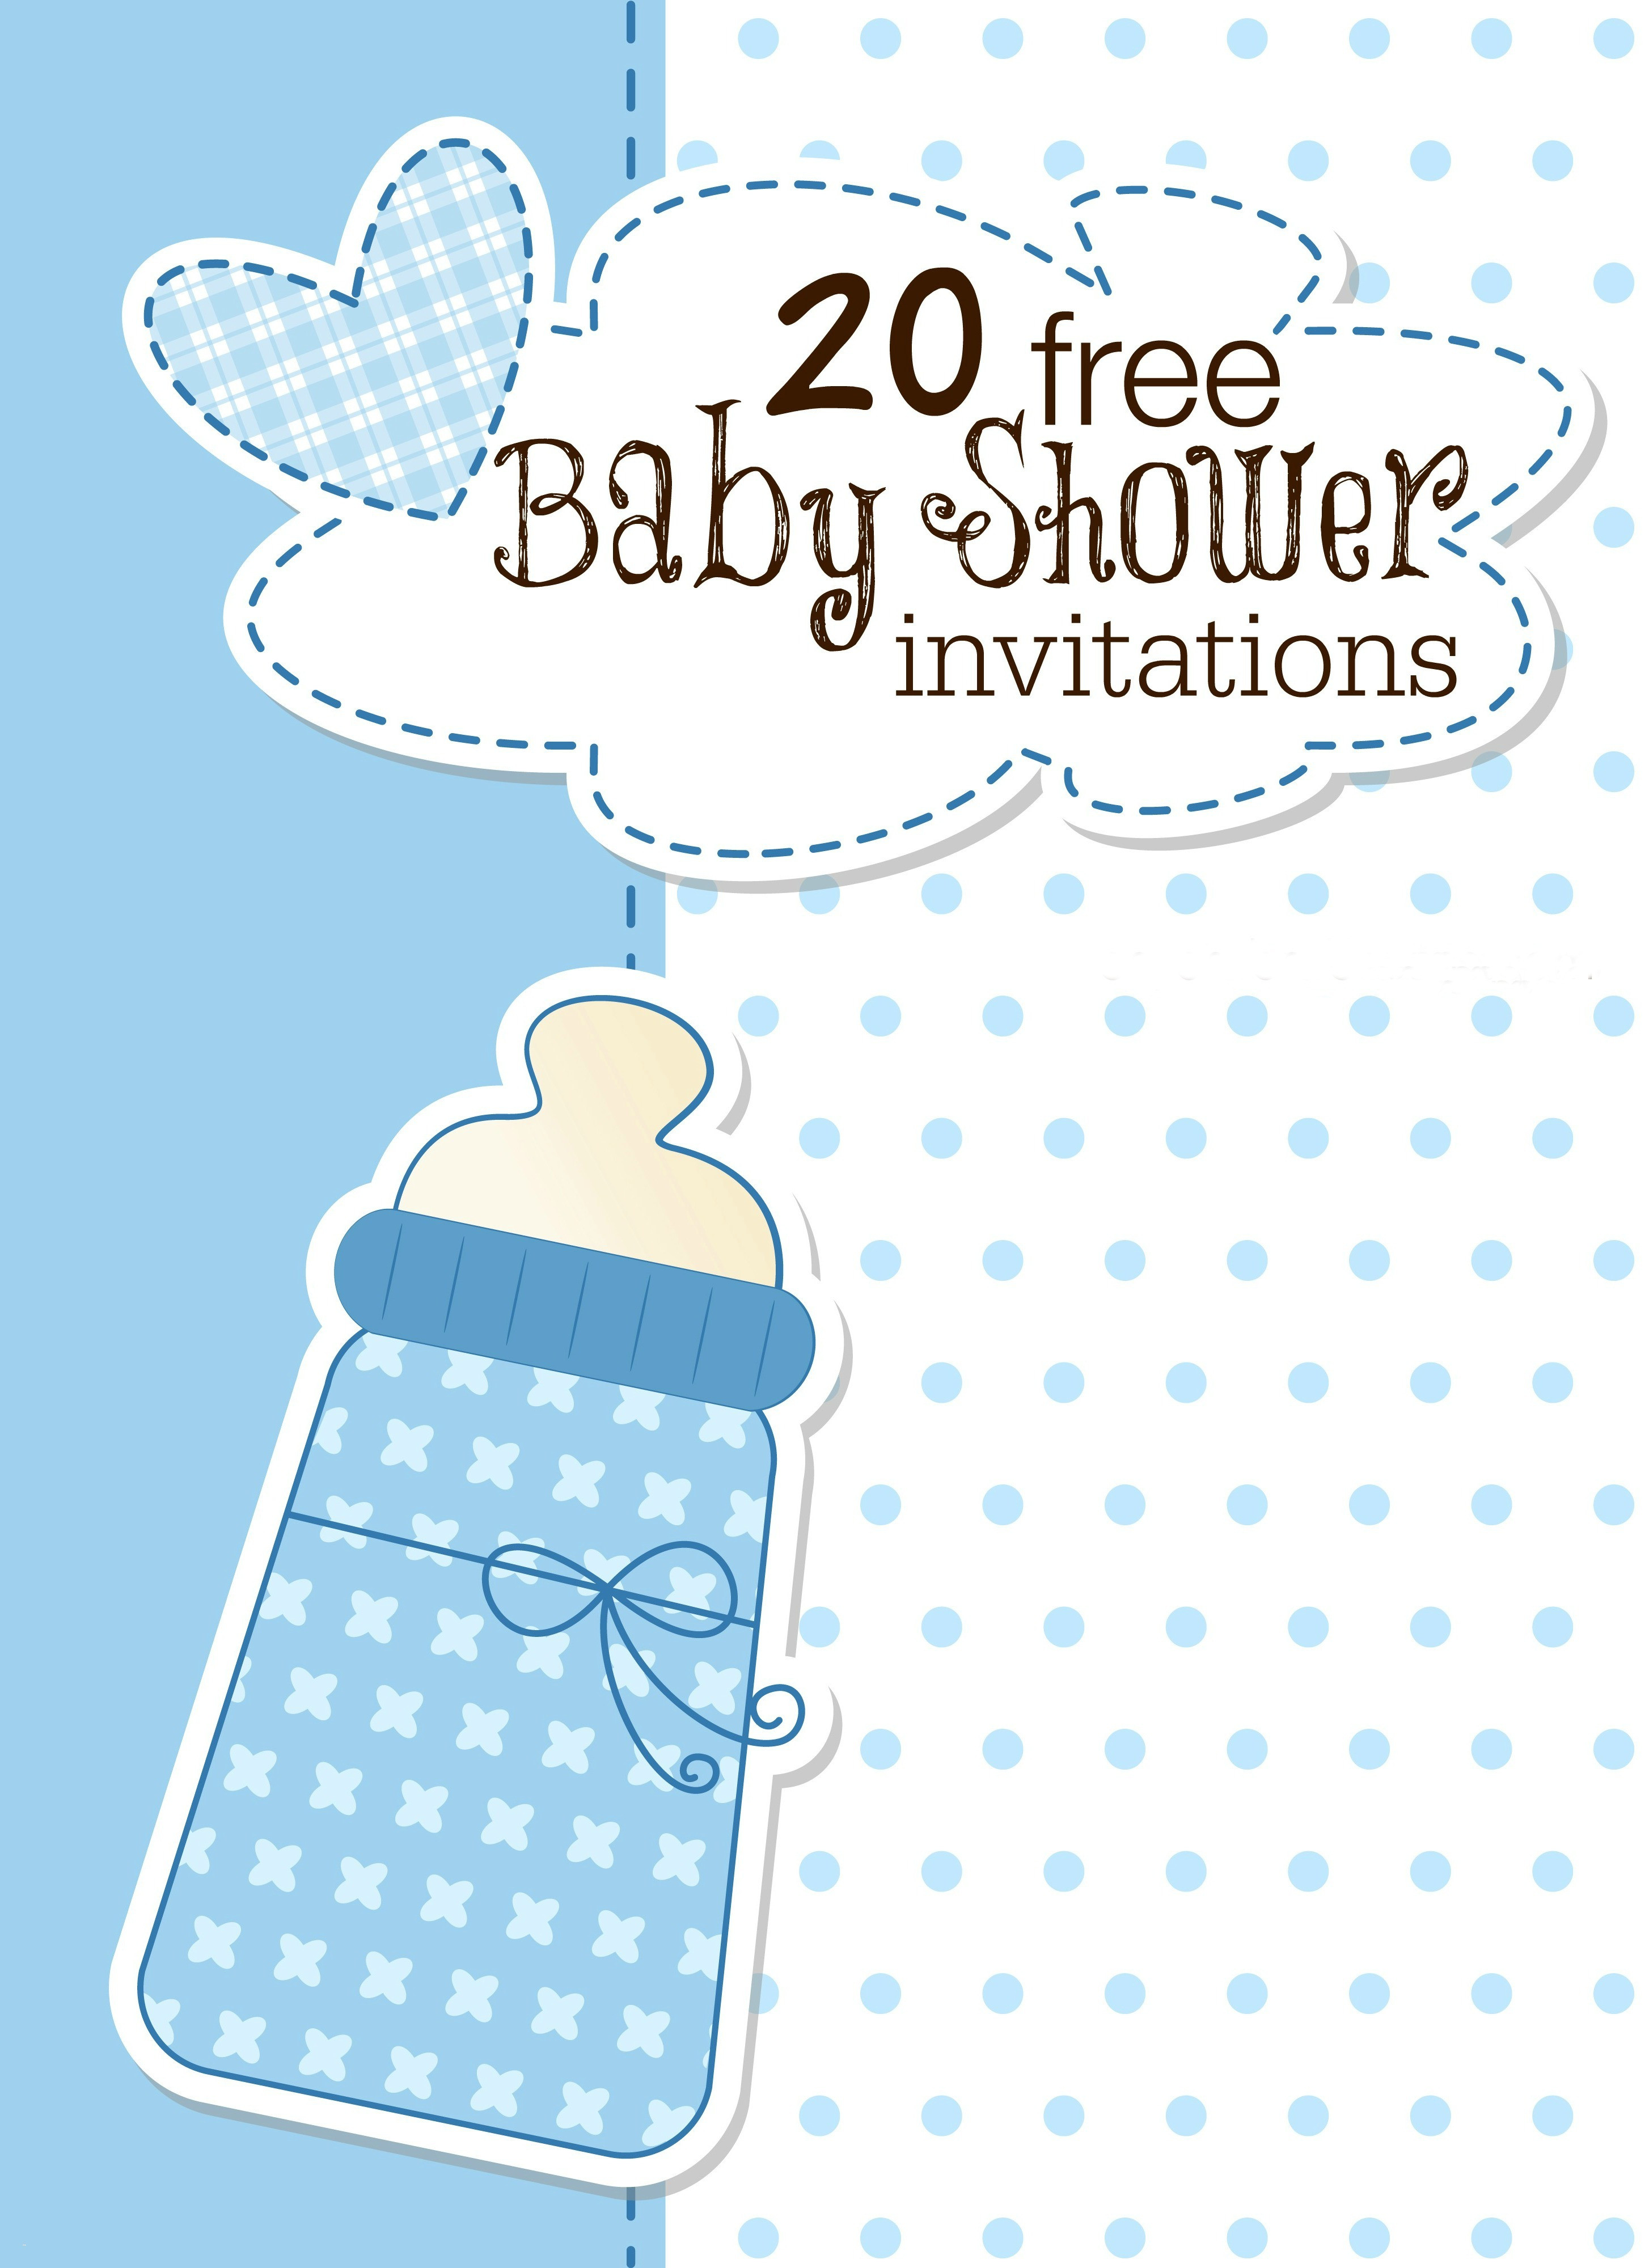 Full Size of Baby Shower:sturdy Baby Shower Invitation Template Image Concepts Baby Shower Invitation Template Digital Baby Shower Invitation Templates Valid Digital Baby Shower Invitation Templates Lovely Baby Shower Postcard